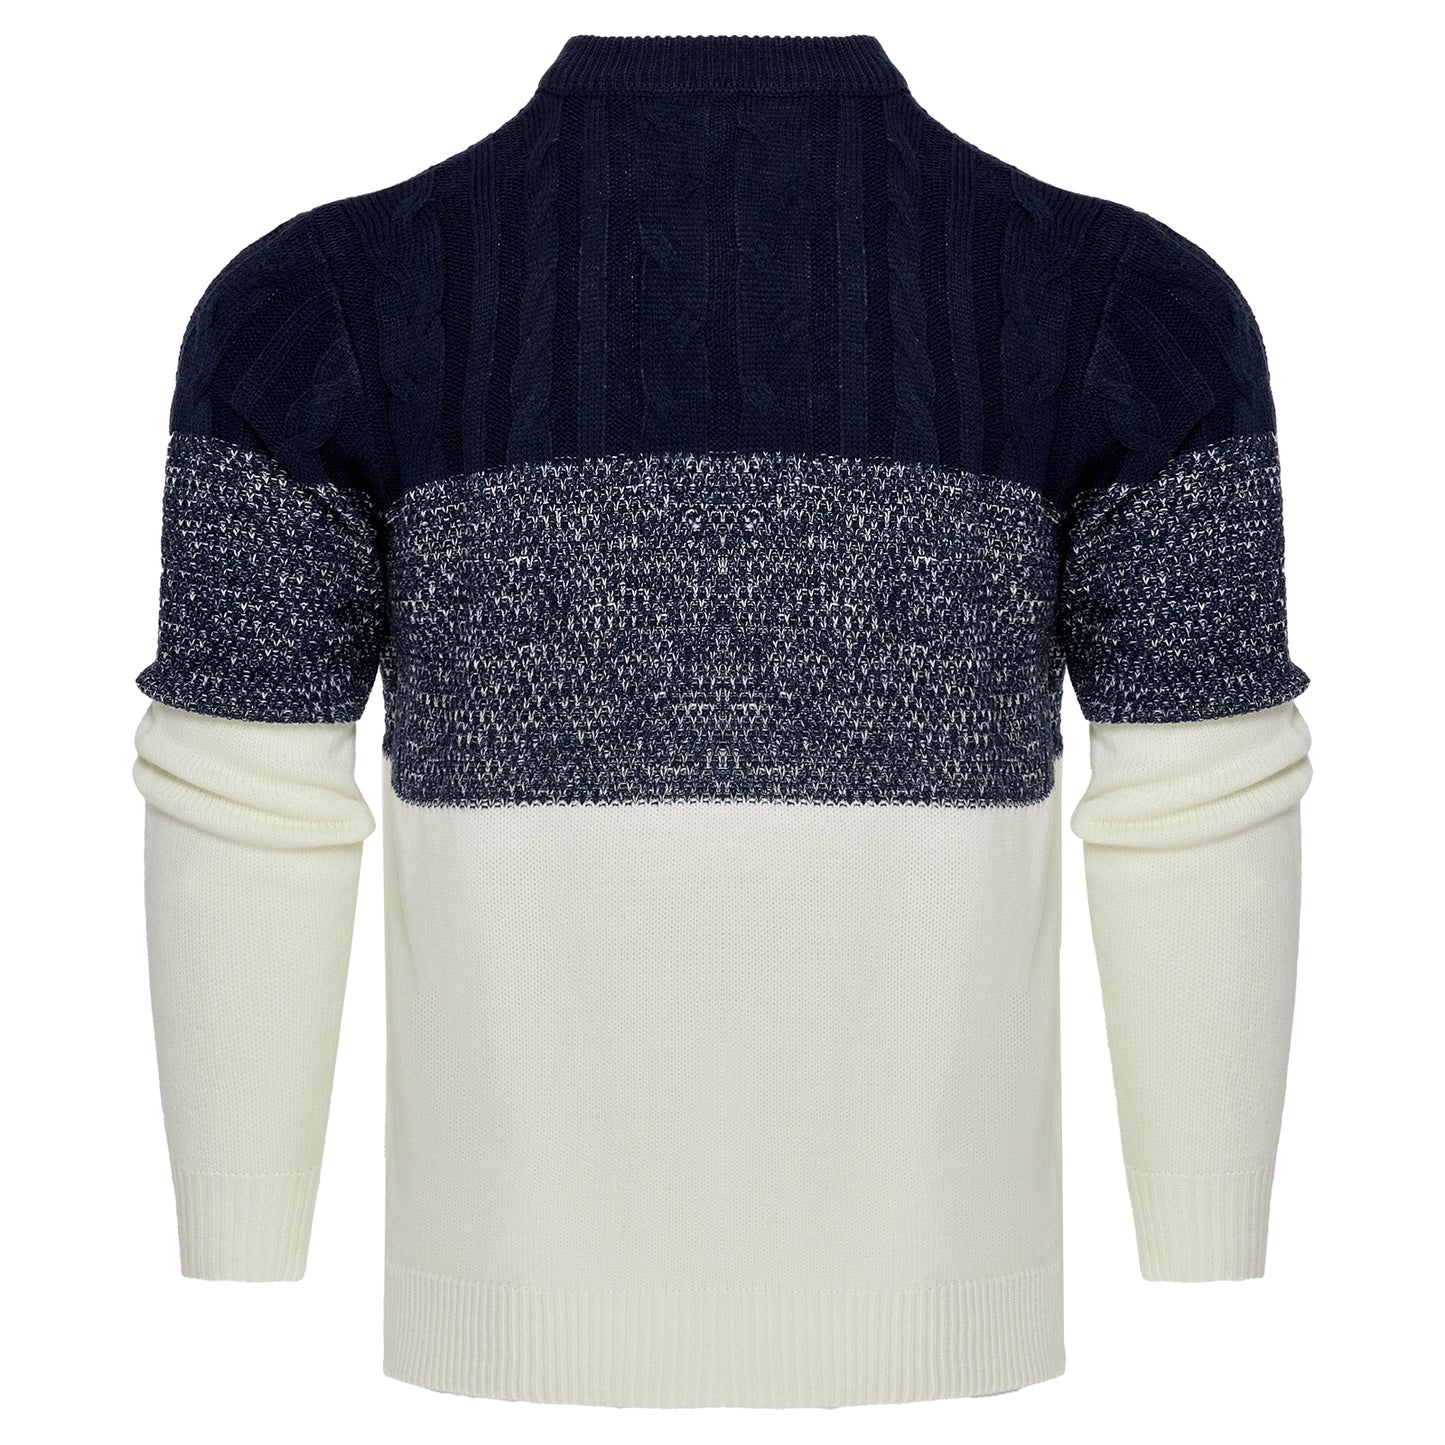 Men's Block Colour Knitted Sweater